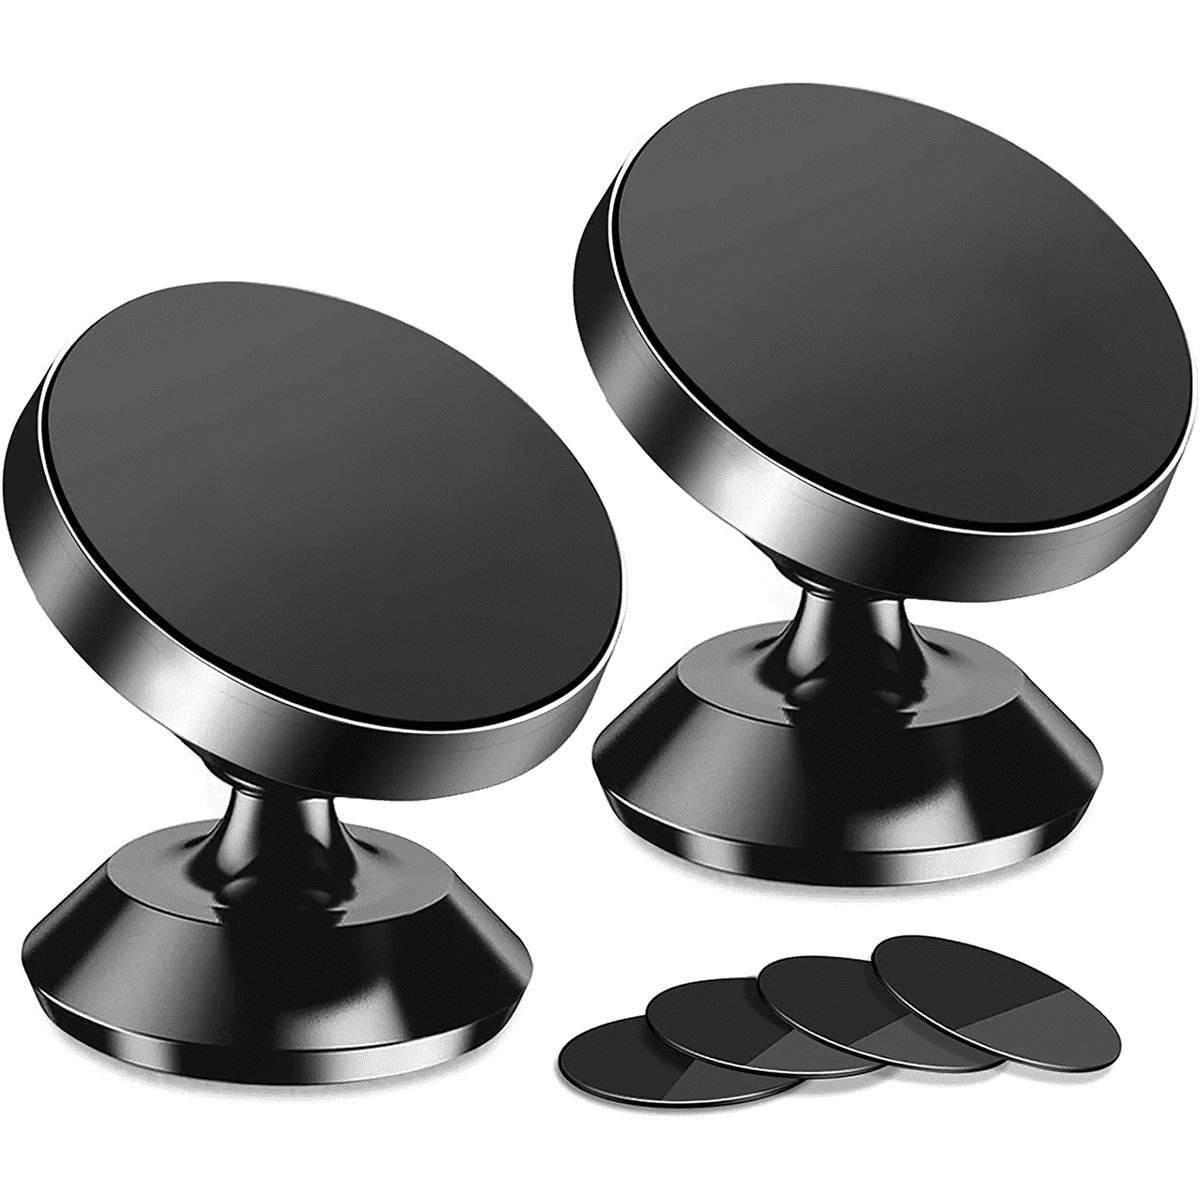 Custom Text and Logo Magnetic Phone Mount, Fit with all car, Super Strong Magnet with 4 Metal Plate, Car Magnetic Phone Holder, 360° Rotation, Universal Dashboard car Mount Fits All Cell Phones, Set of 2 - Delicate Leather